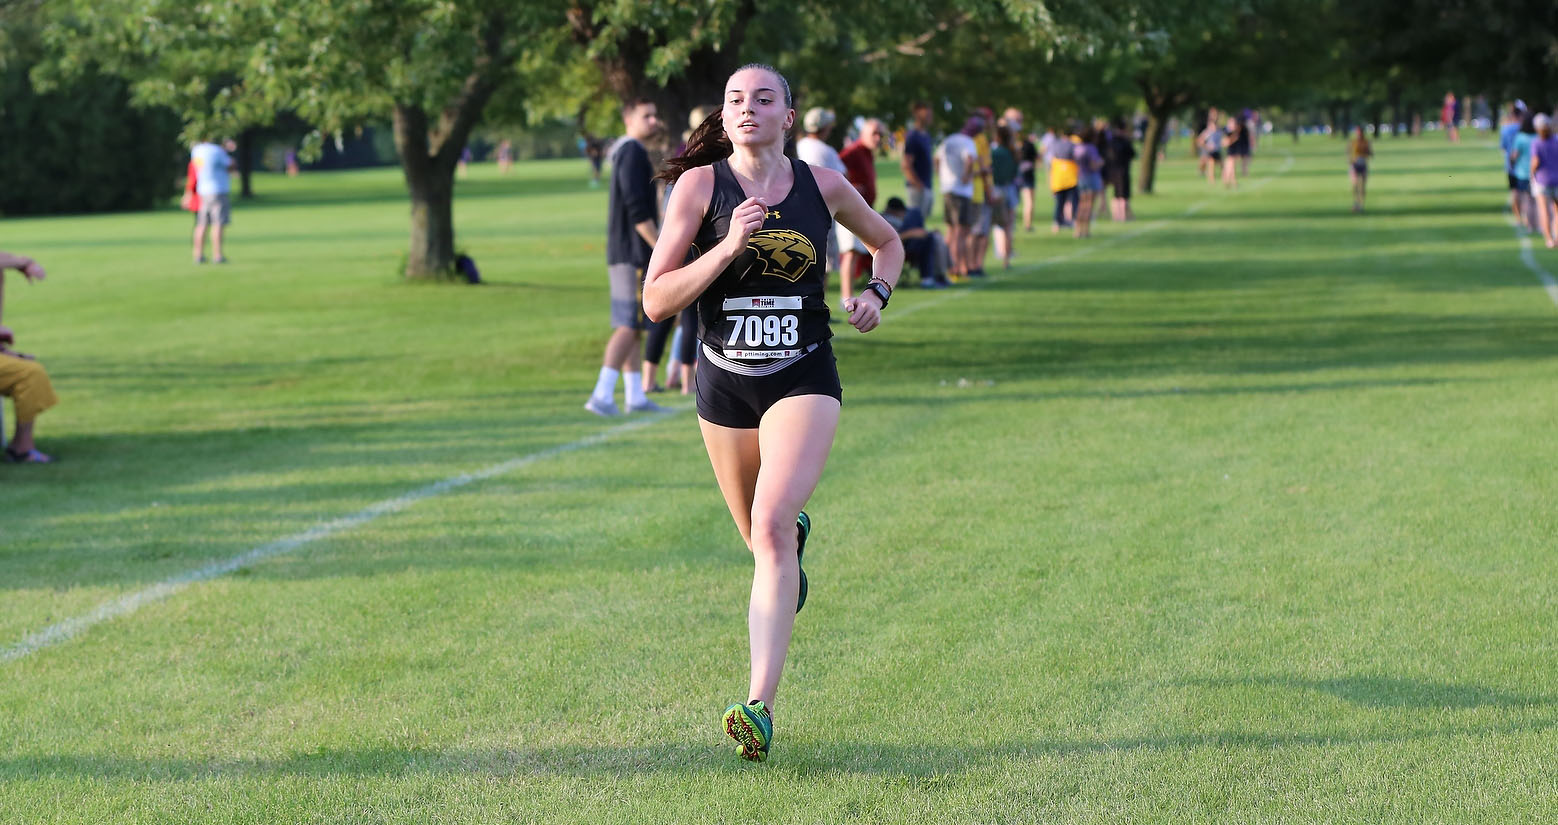 Hannah Lohrenz defeated 60 other runners at the Titan Fall Classic with her winning time of 23:46.